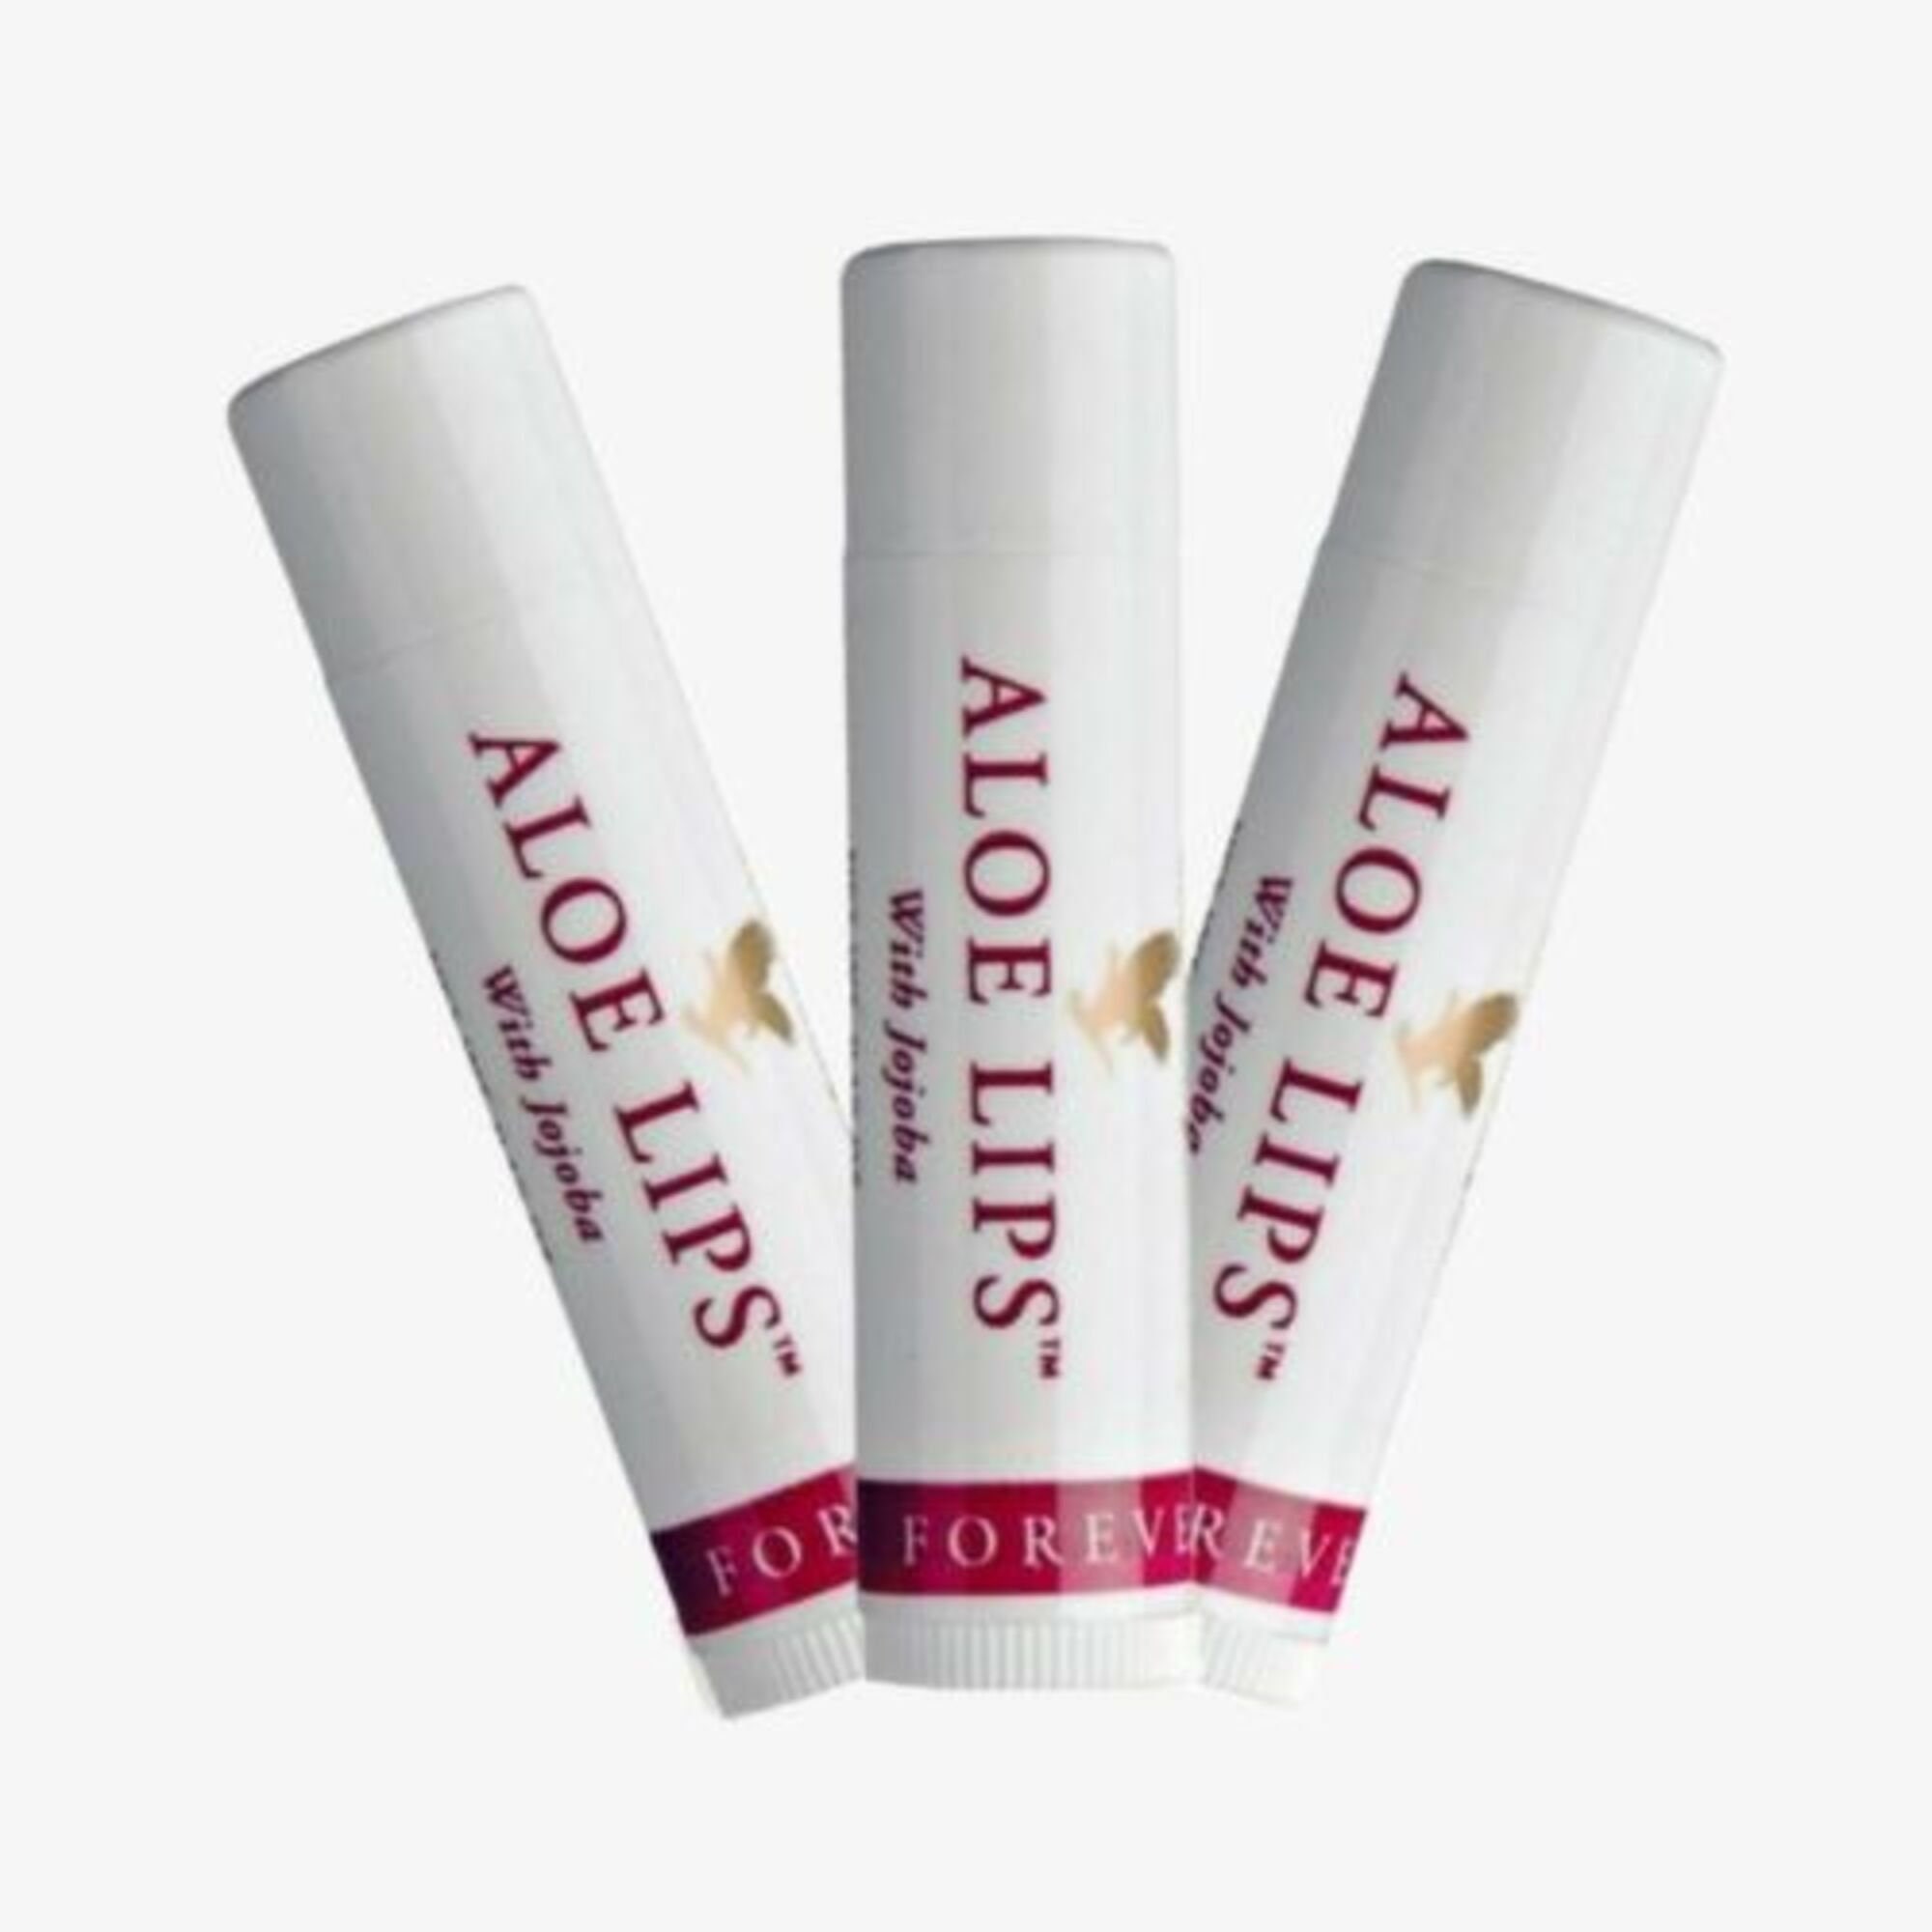 ALOE LIPS Forever Living Set of 3 Soothing Calming - Etsy